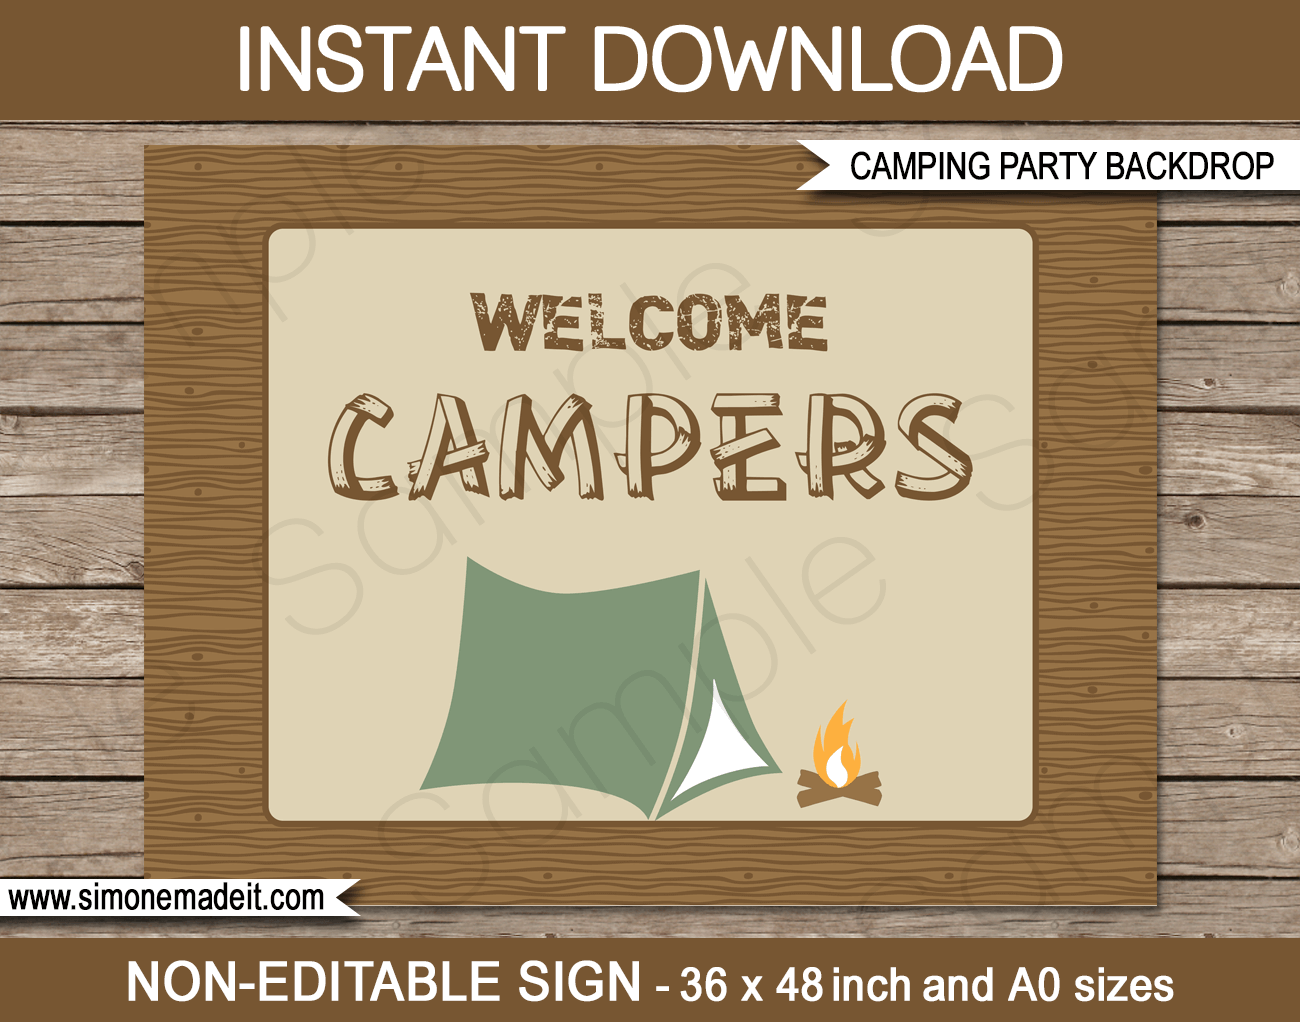 Camping Party  Backdrop - Welcome Campers | Printable DIY Template | Party Decorations | 36x48 inches | A0 | $4.50 Instant Download via SIMONEmadeit.com